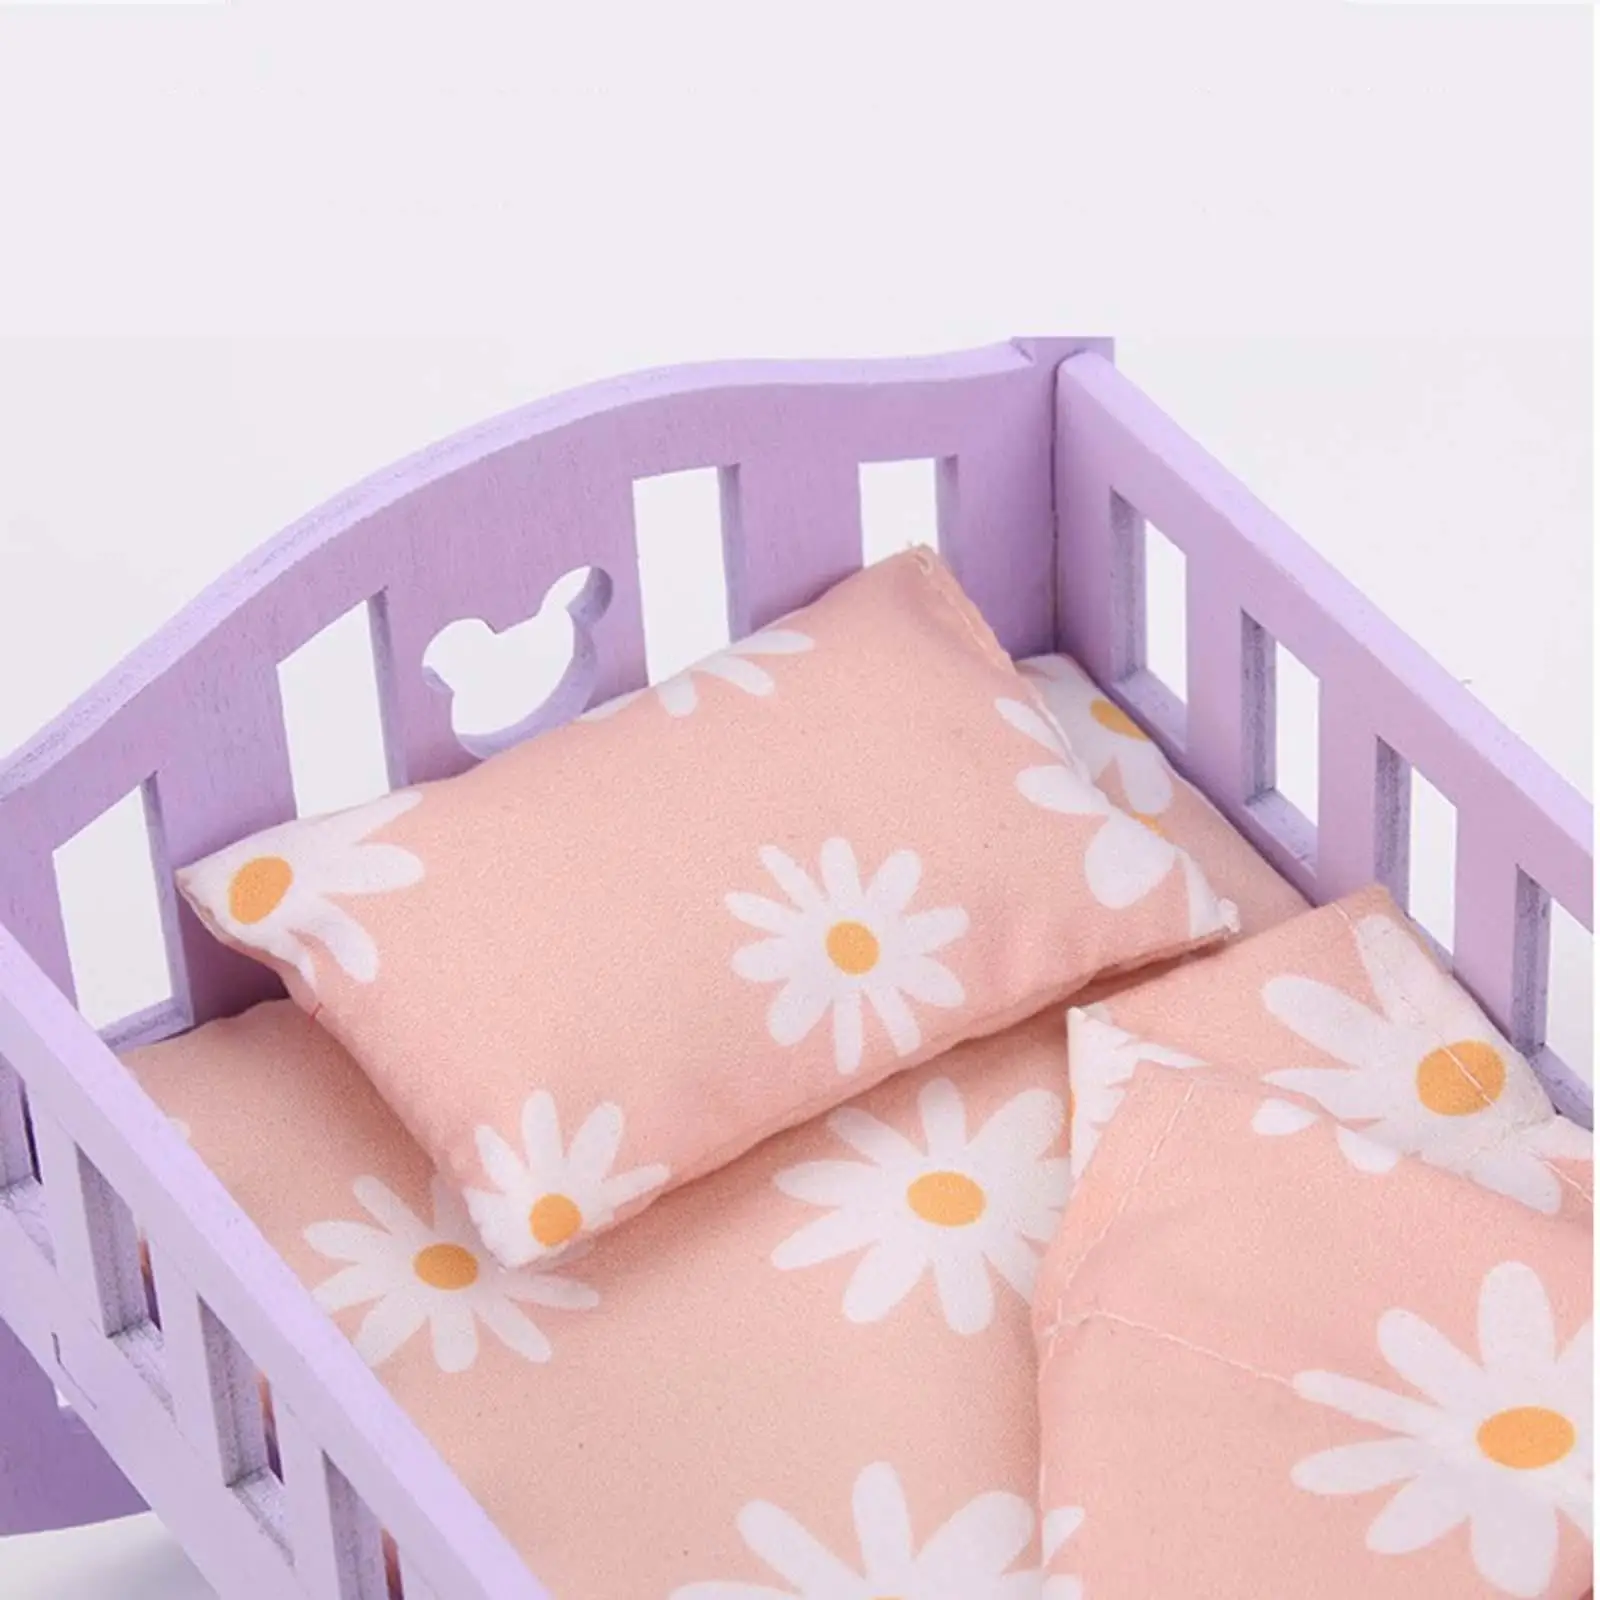 Fashion Doll Bed with Quilt, Pillow and Mattress Bedroom for 1:12 Doll Decor